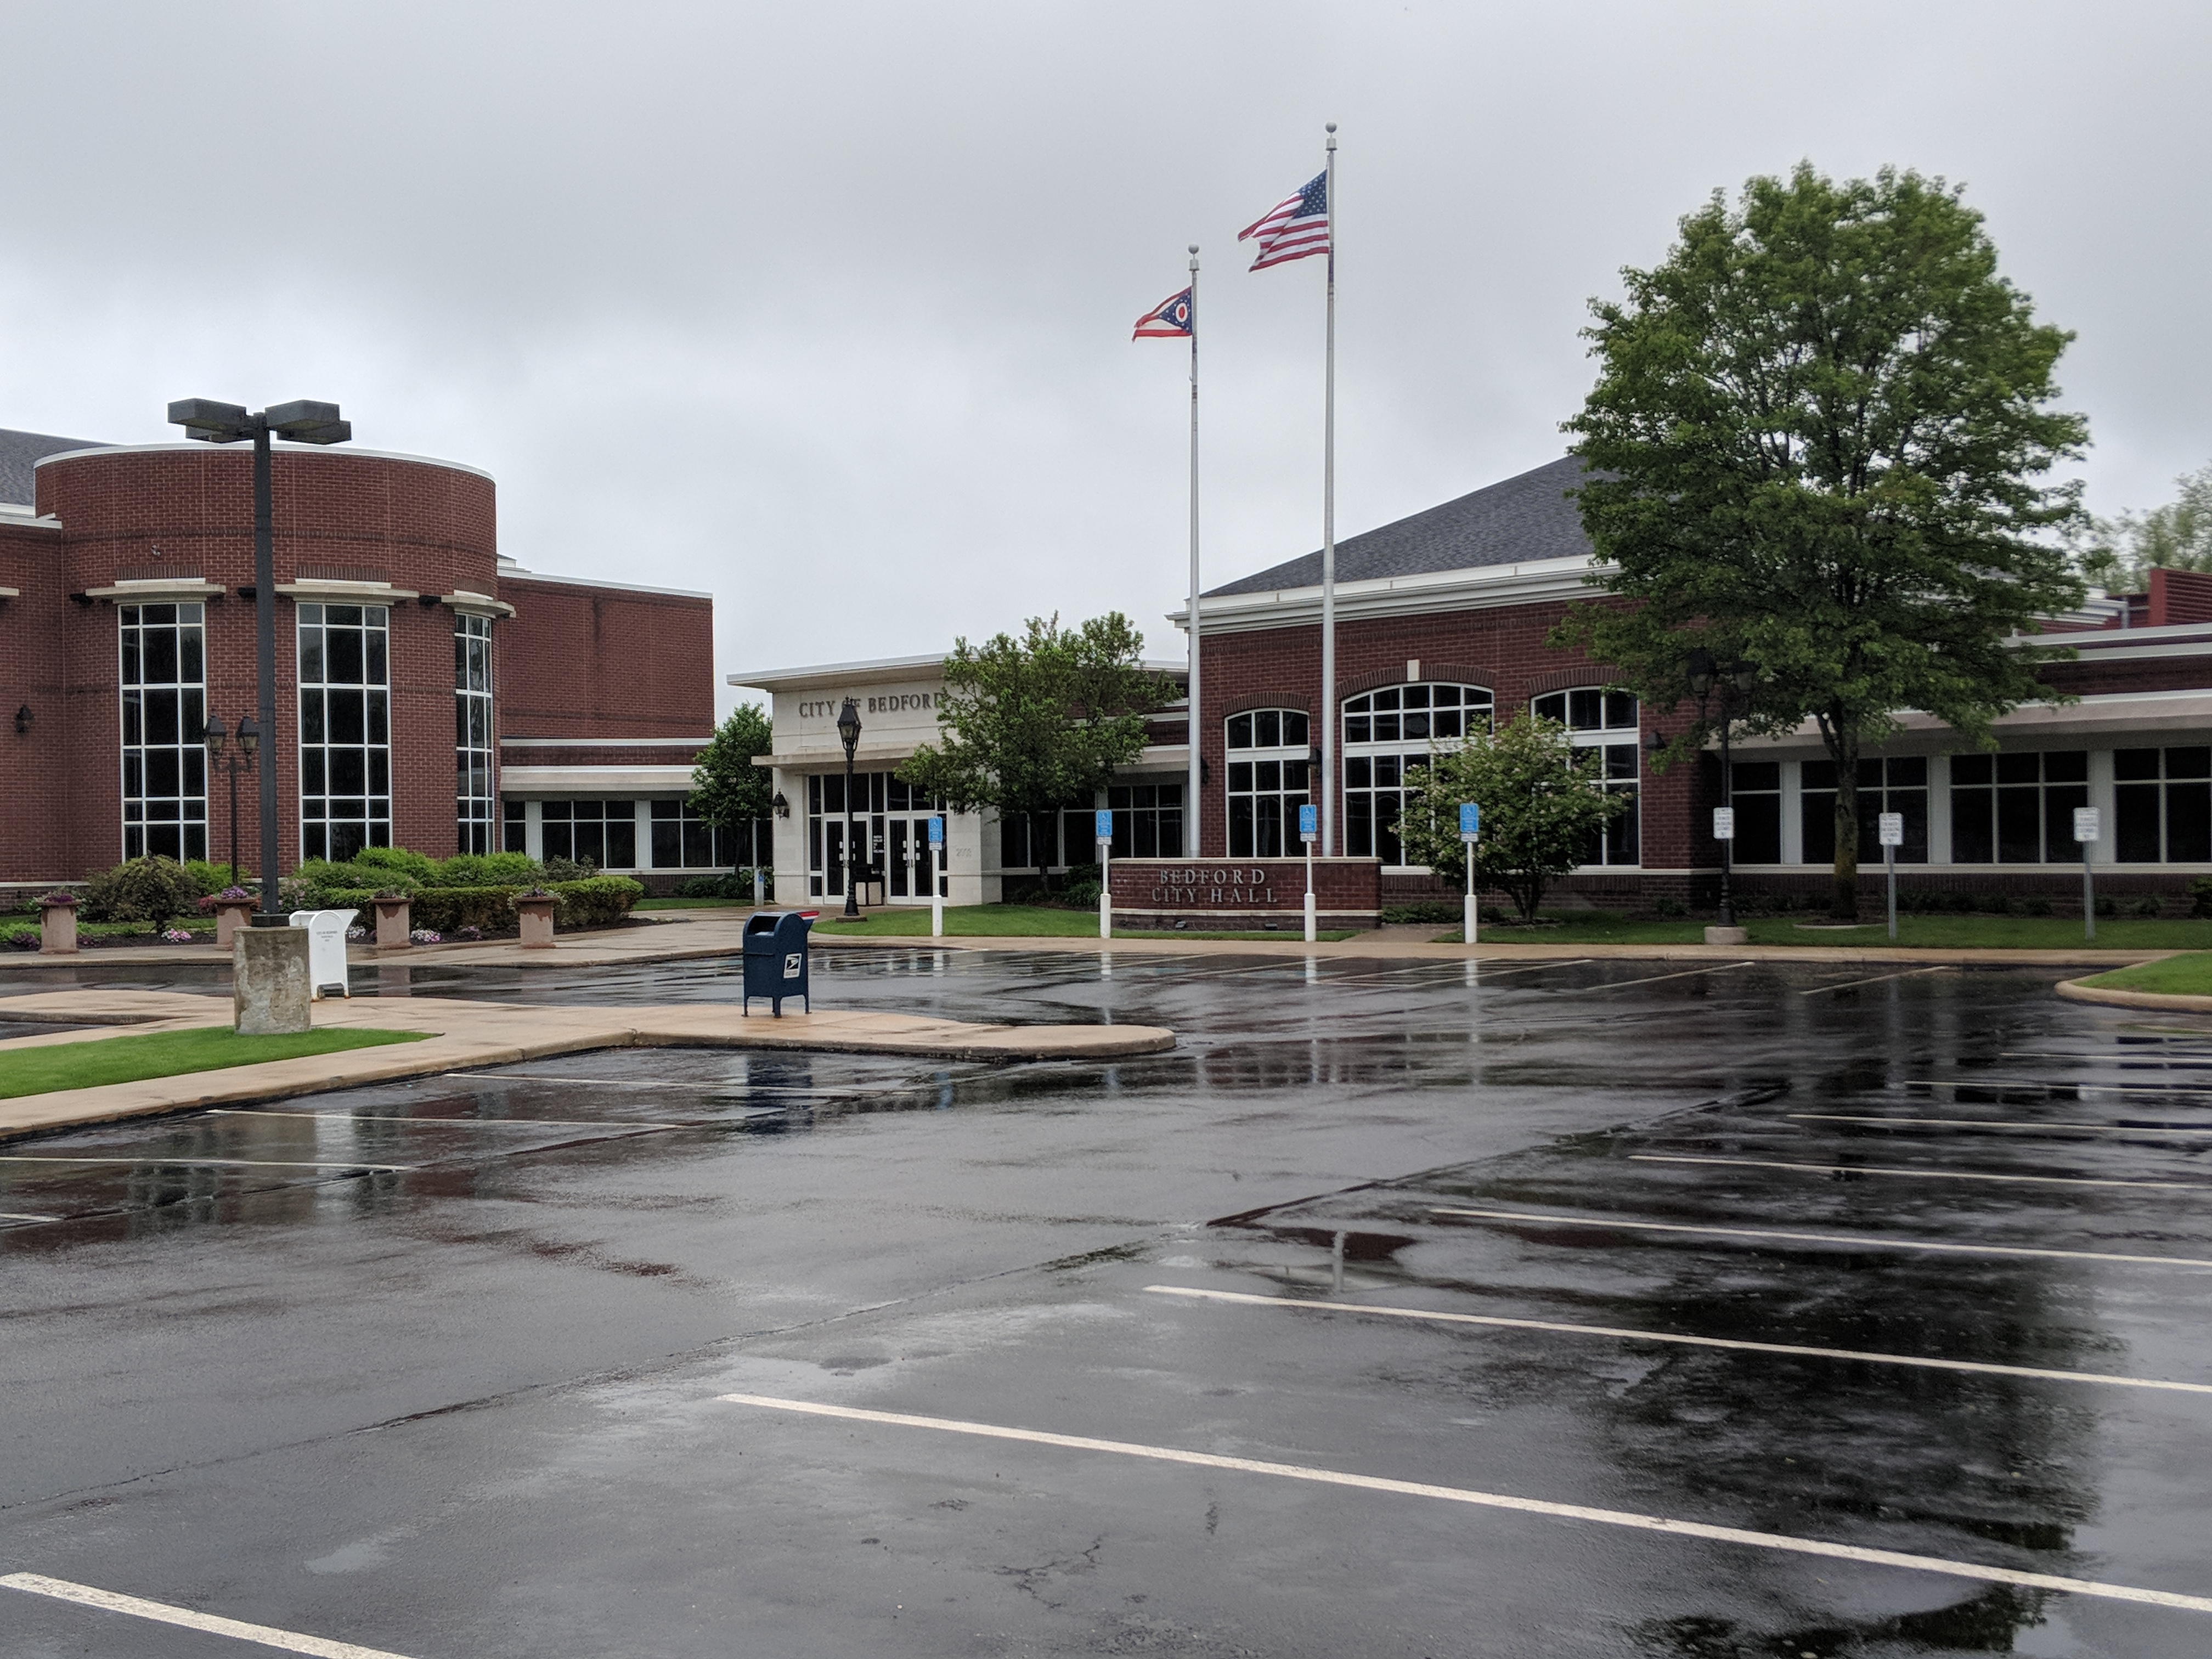 June 1, 2020 Bedford, OH City Council Meeting Agenda